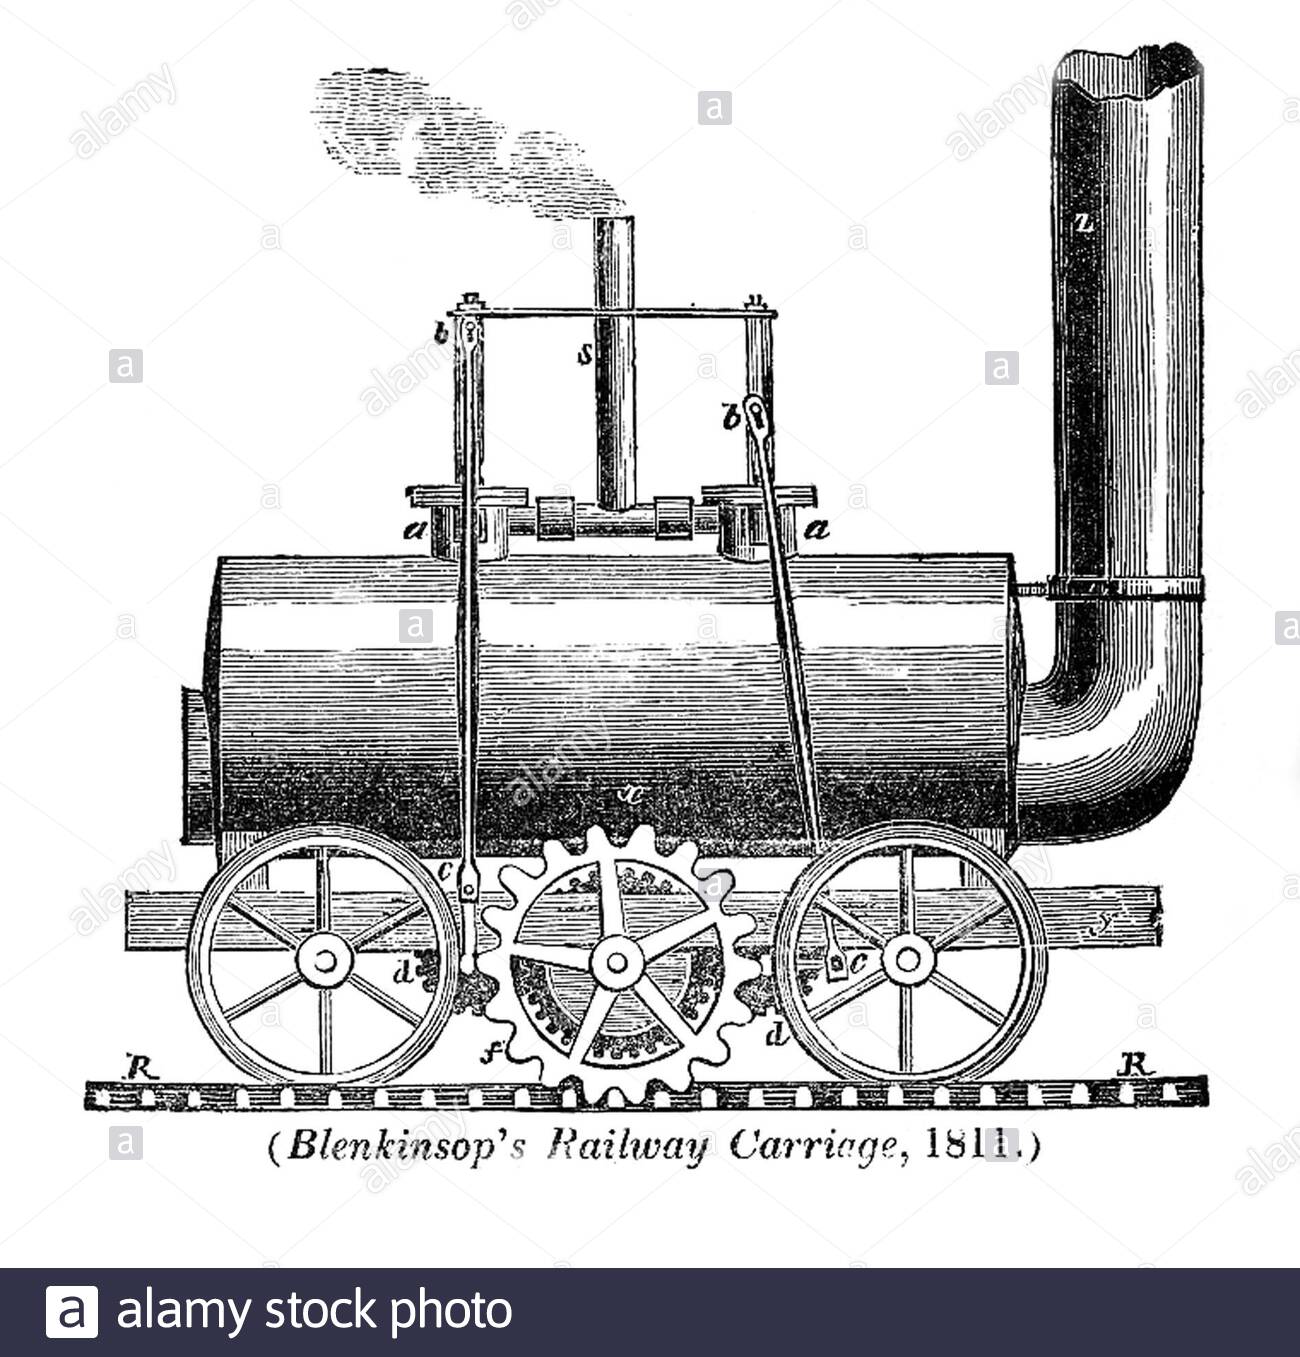 John Blenkinsop, 1783 – 1831, was an English mining engineer and an inventor of steam locomotives, who designed the first practical railway locomotive in 1811, vintage illustration from 1830 Stock Photo